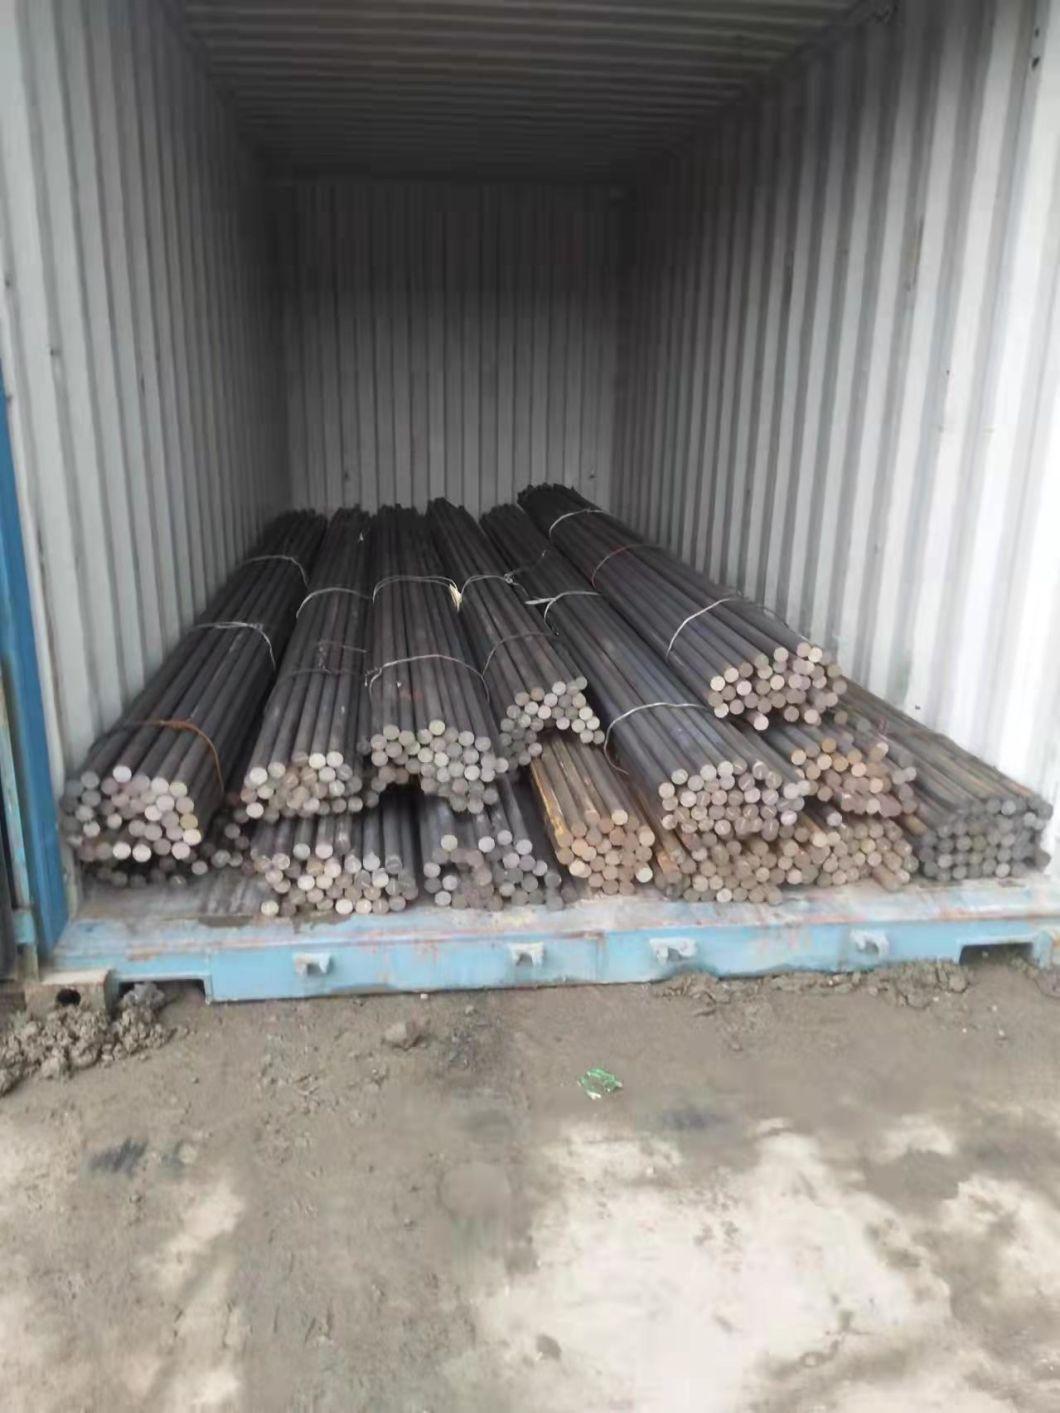 Factory Price Best Delivery Hot Rolled 350mm 200mm S10c Q235 ASTM A36 Carbon Steel Round Bar